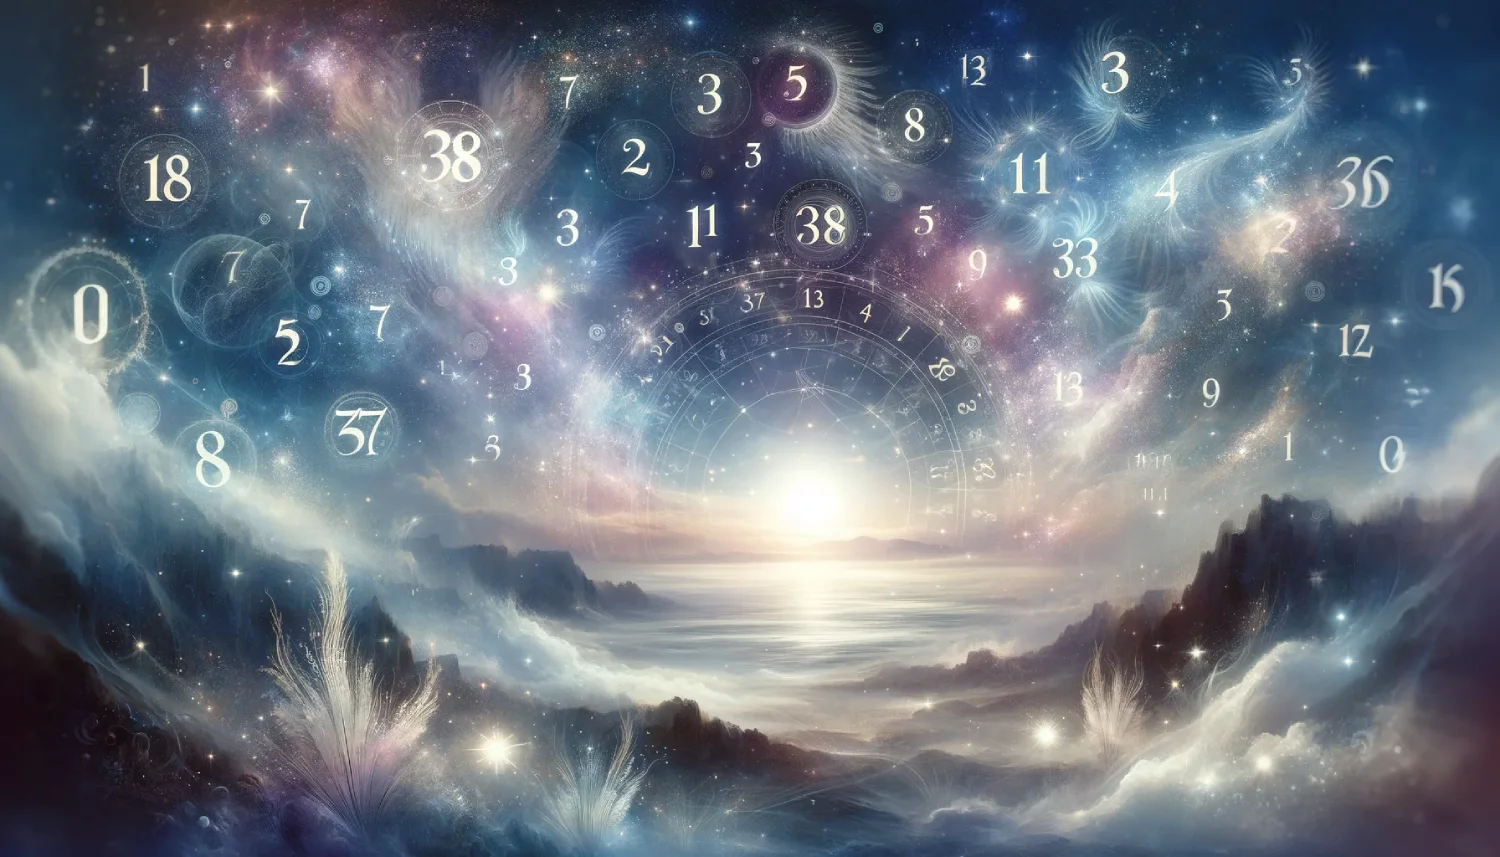 Foundational Numbers in Numerology and Angel Numbers